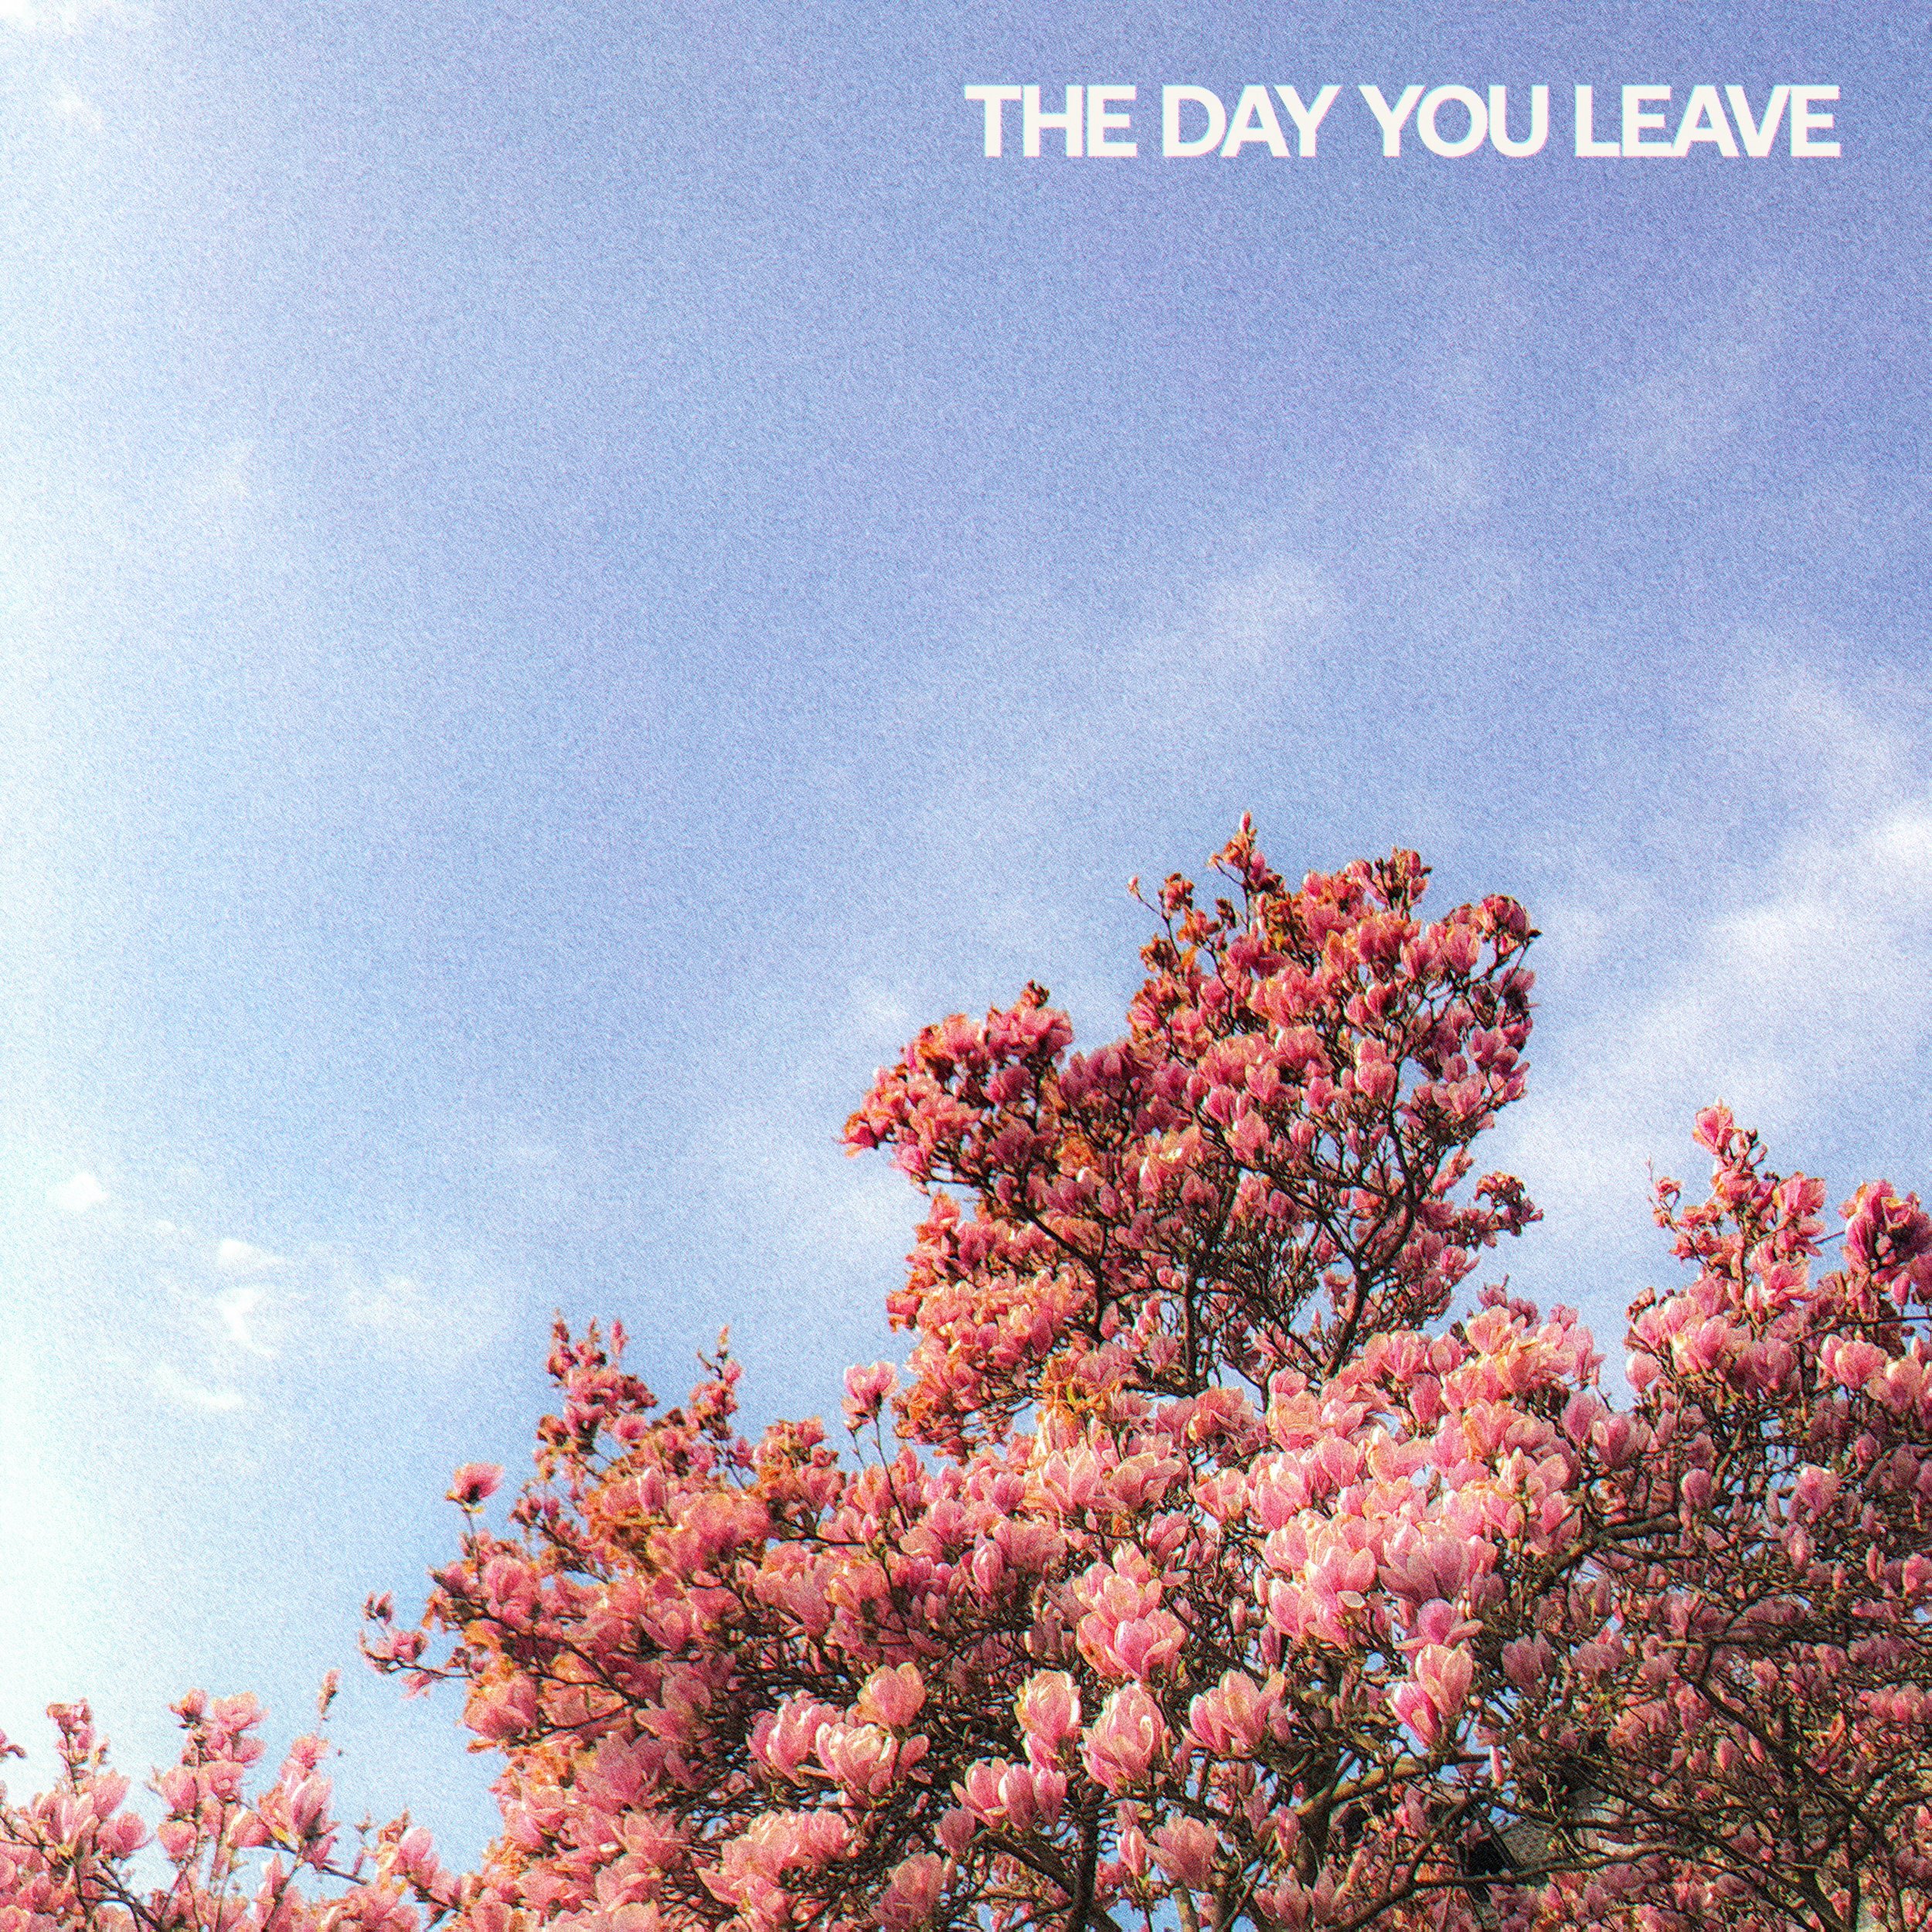 Brainchild - The Day You Leave (Single)